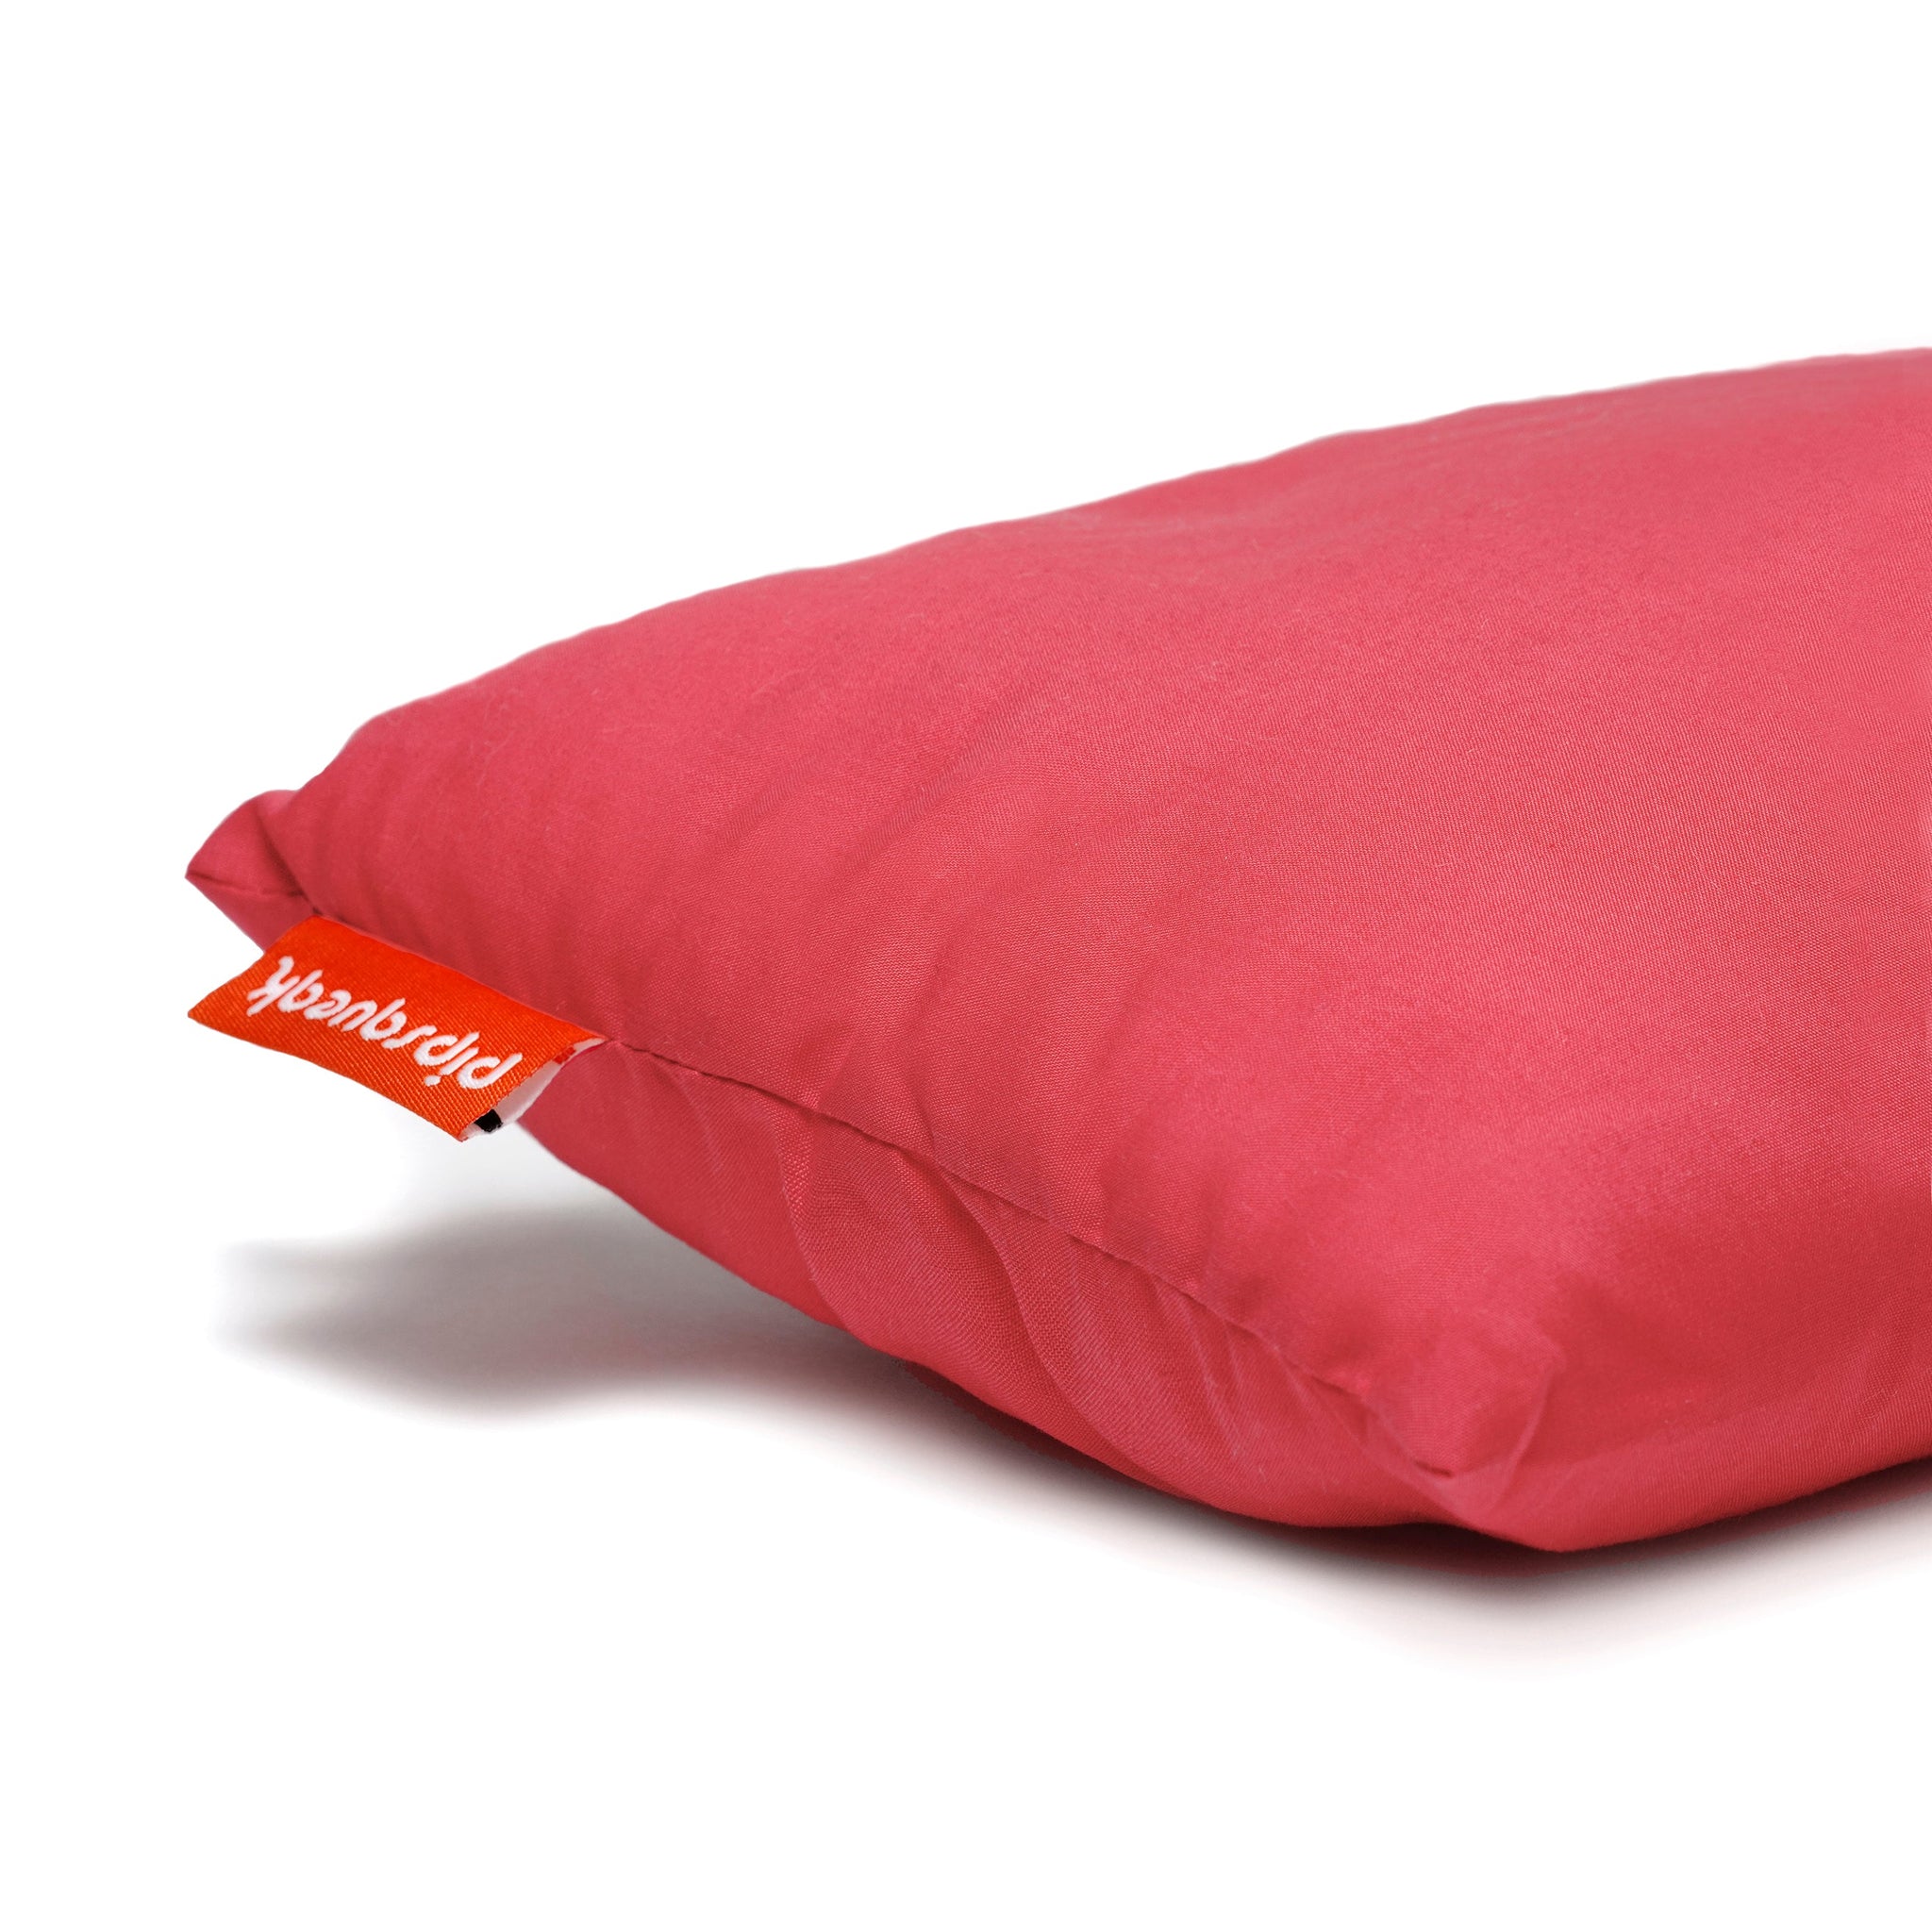 Urban Infant Pipsqueak Small | Tiny | Mini Pillow - Washable and Hypoallergenic